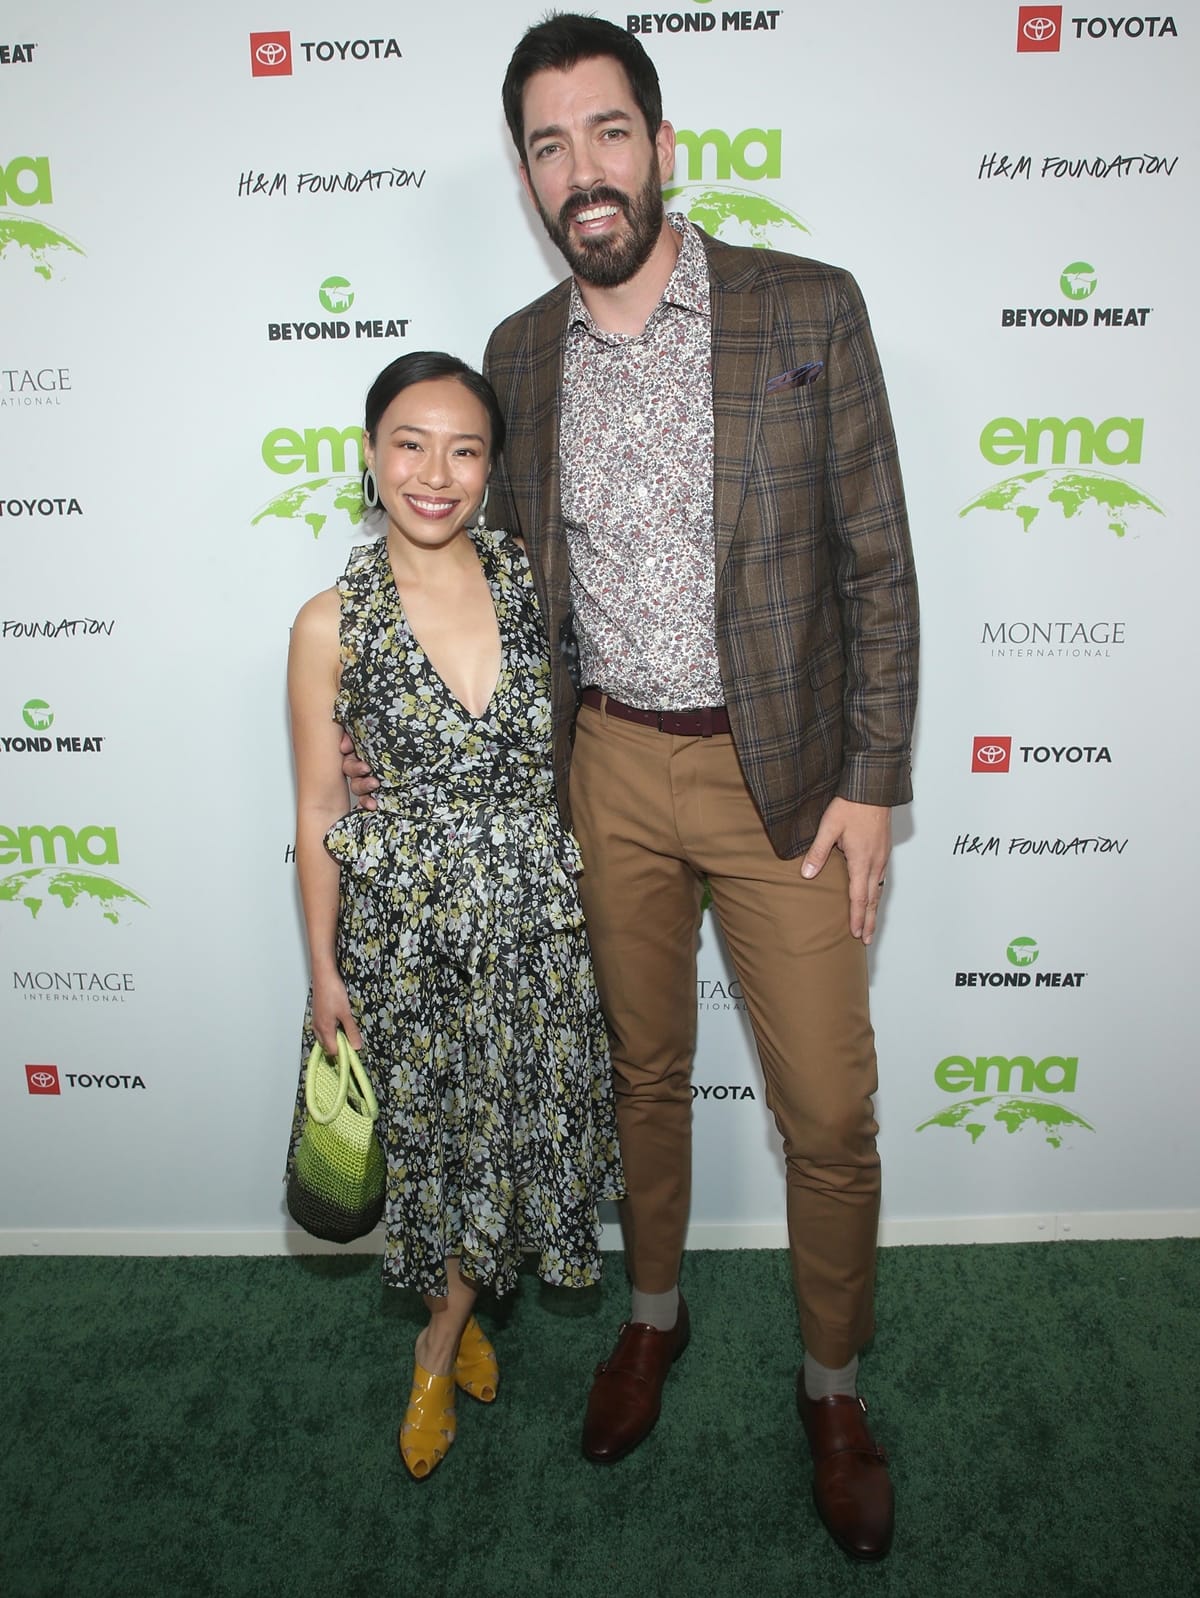 Drew Scott met his much shorter wife Linda Phan during a Toronto Fashion Week event in 2010